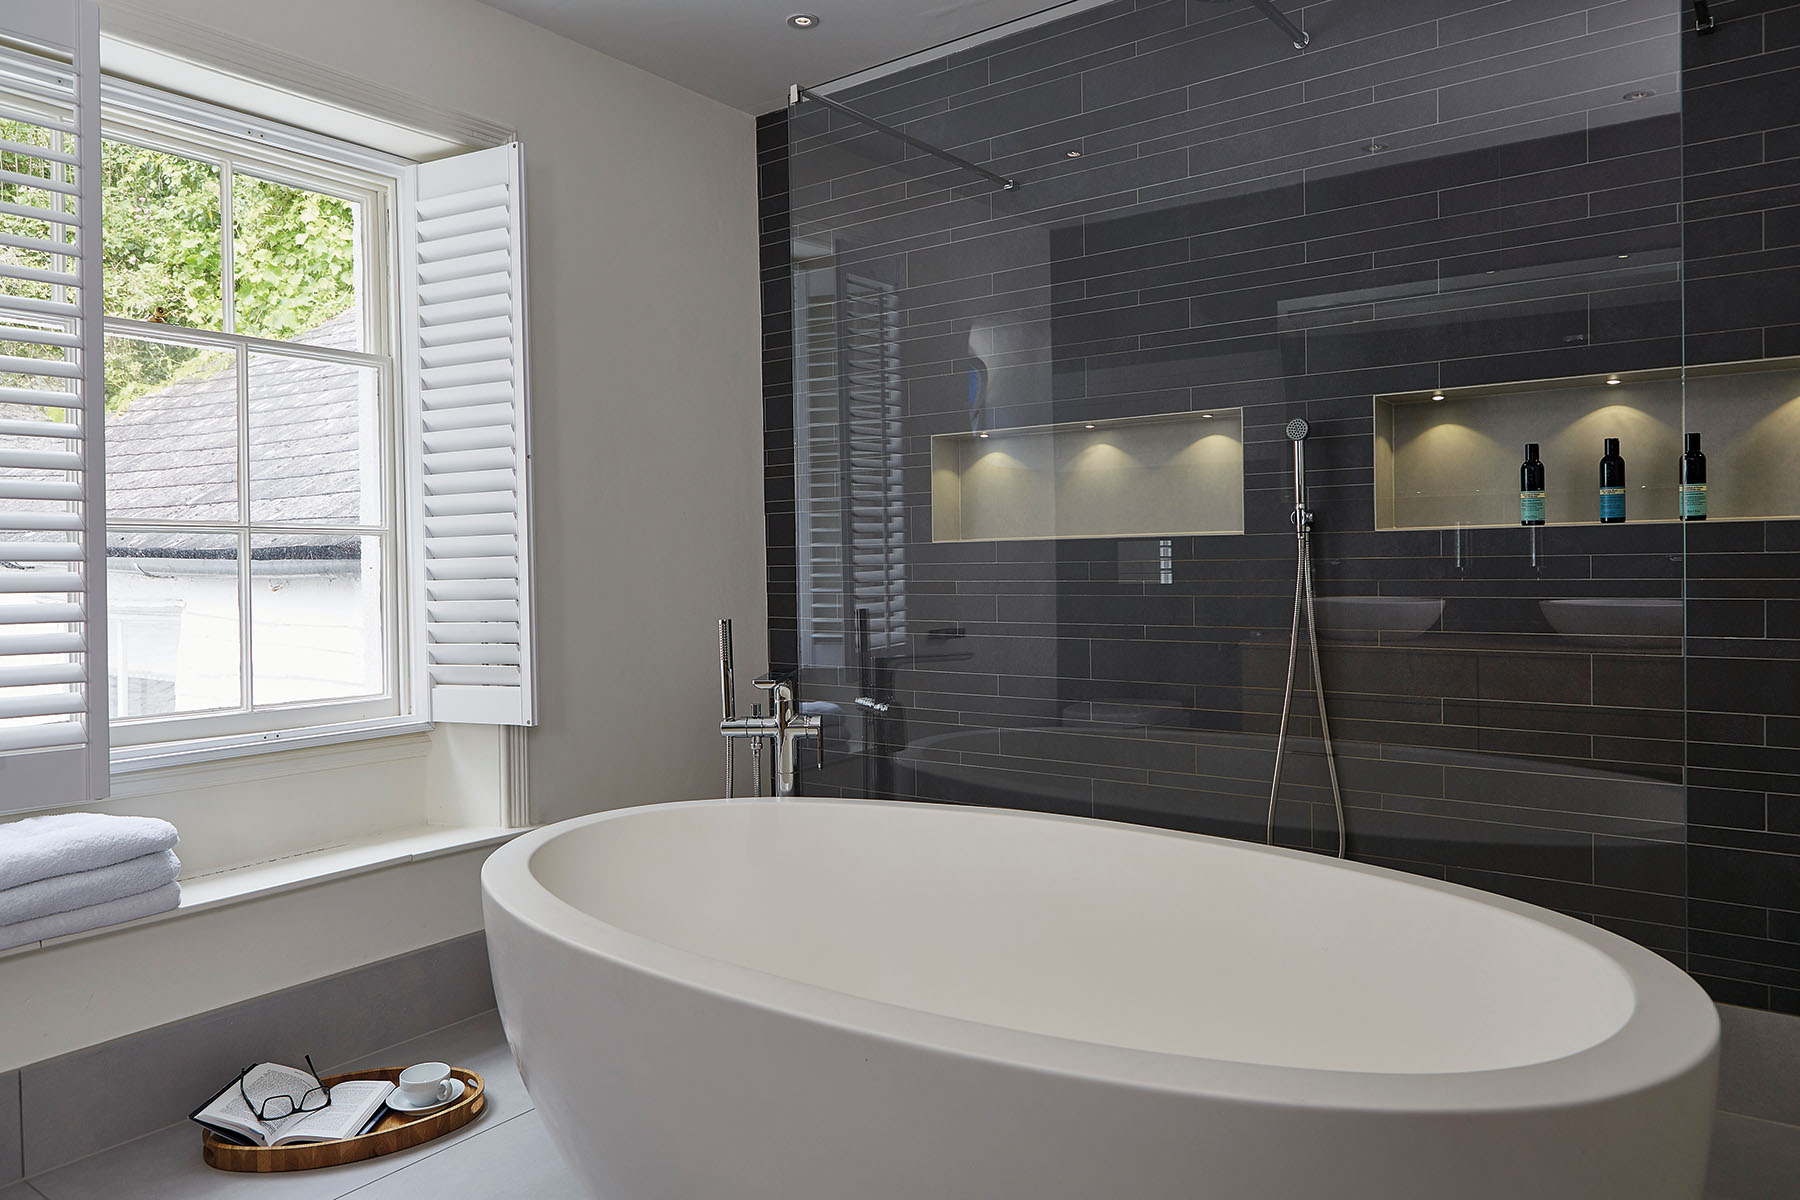 A bathroom designed by Sapphire Spaces in Topsham